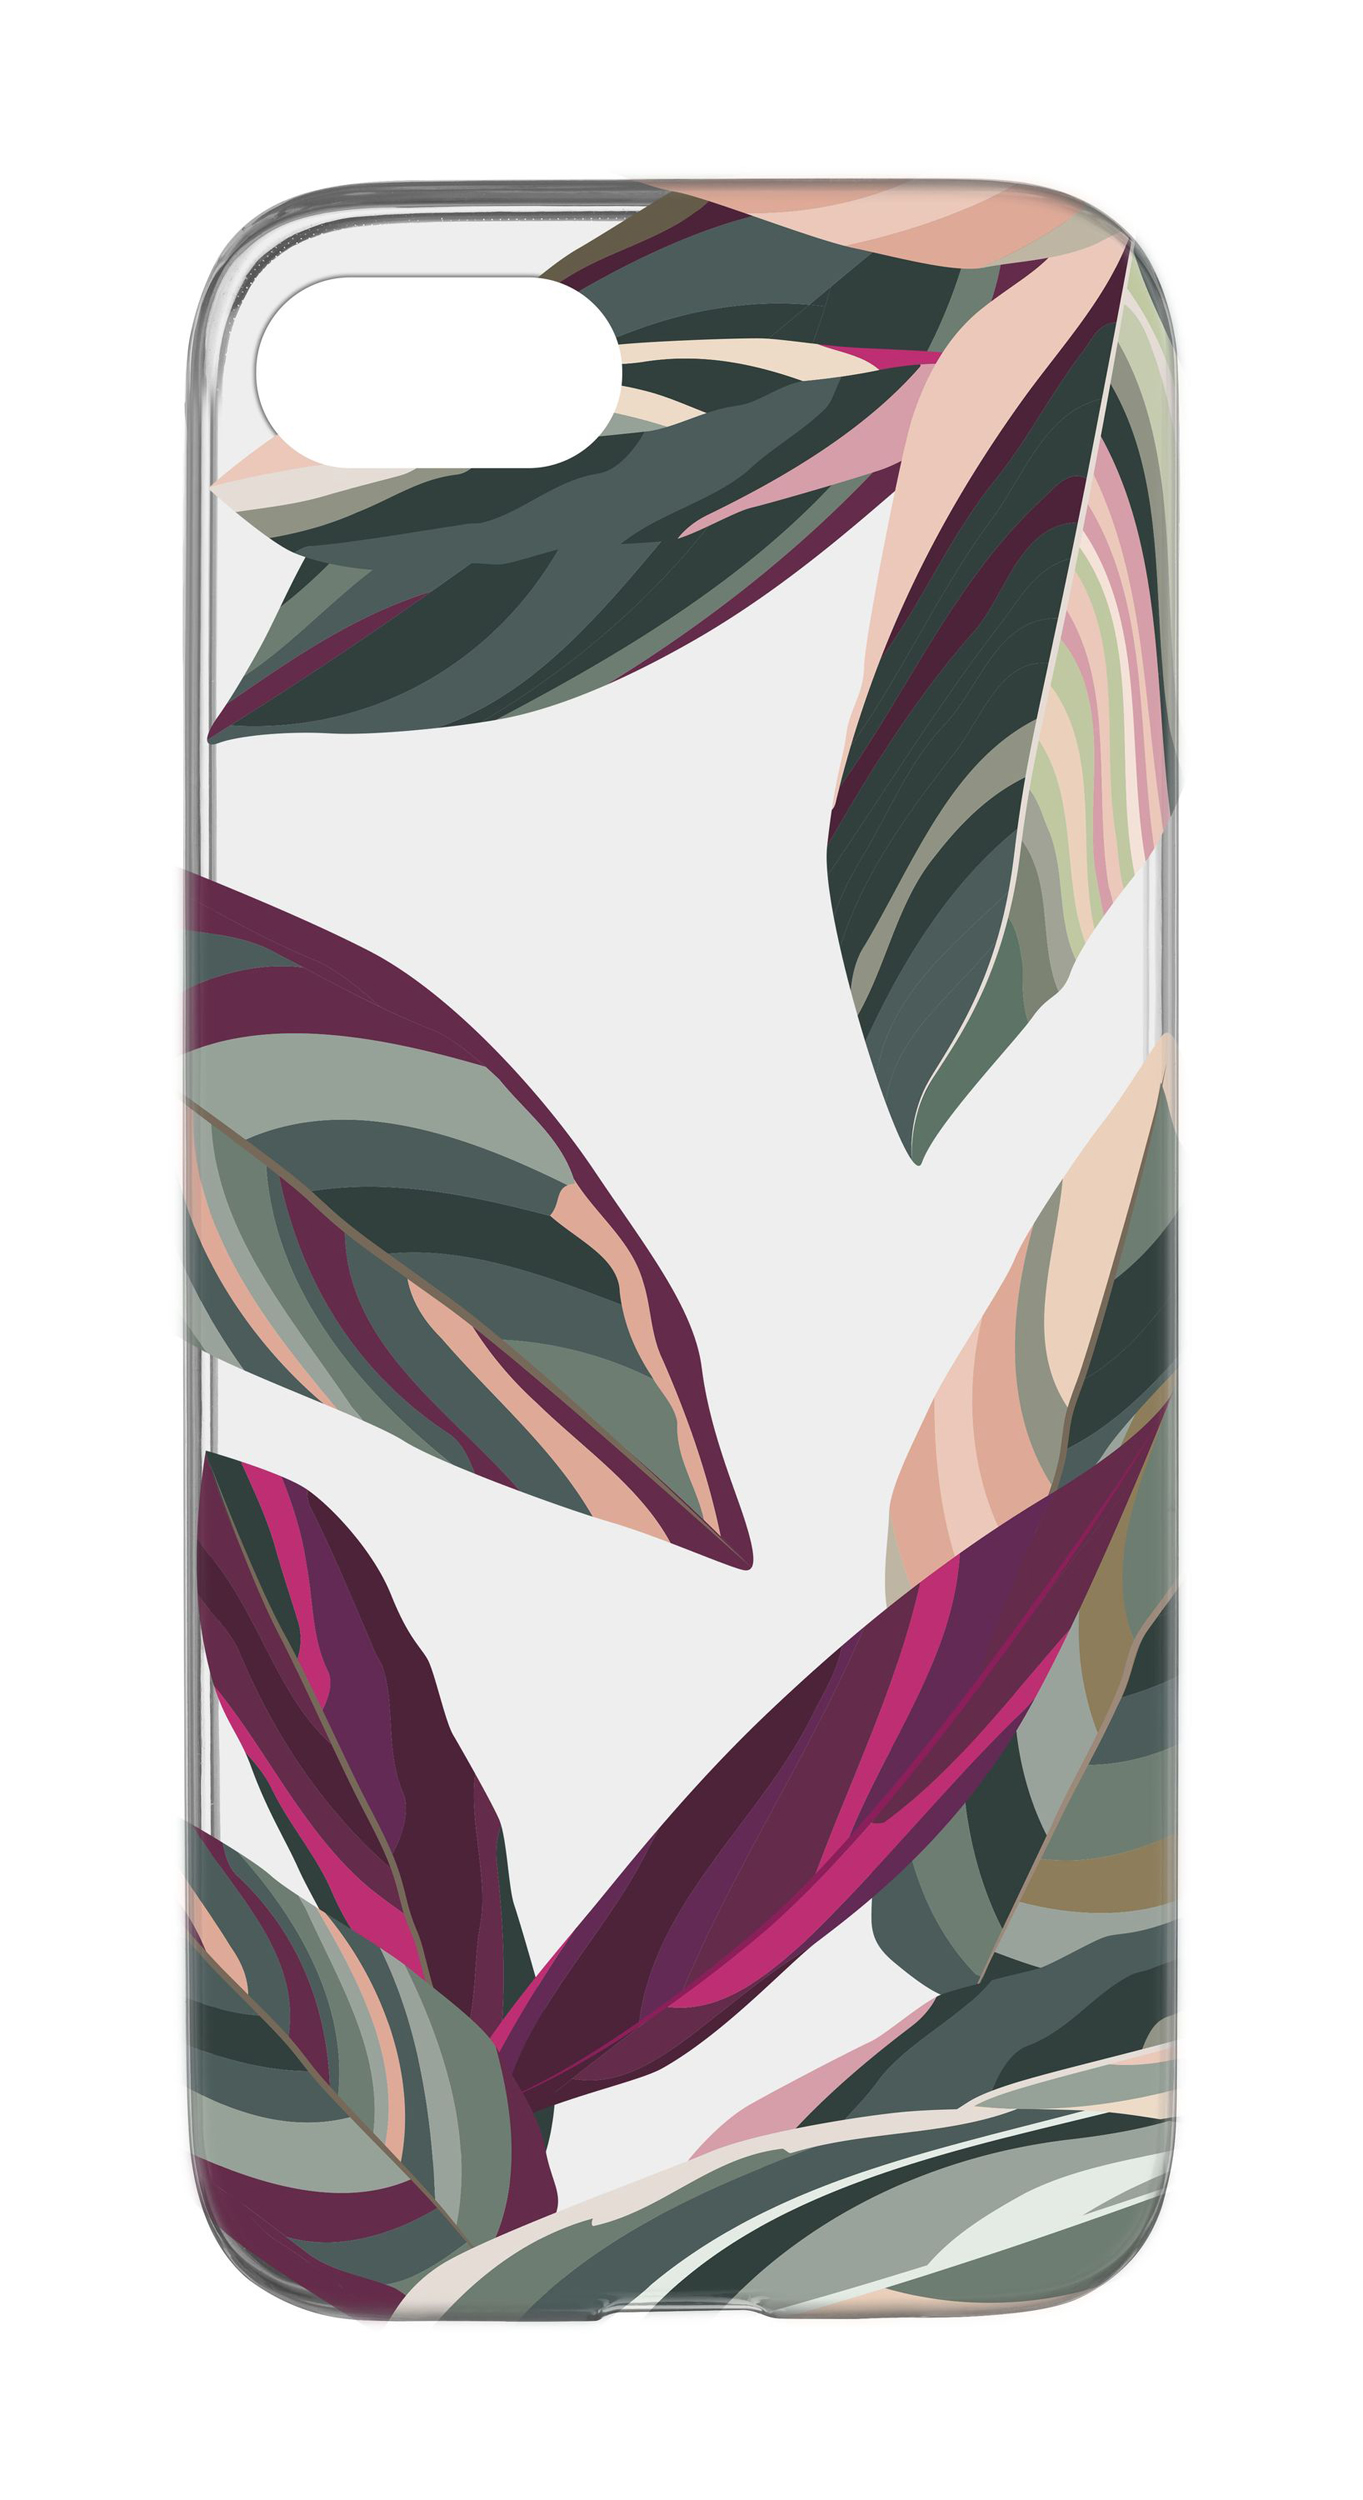 iPhone SE (2020)/8/7/6s/6, case style, forest